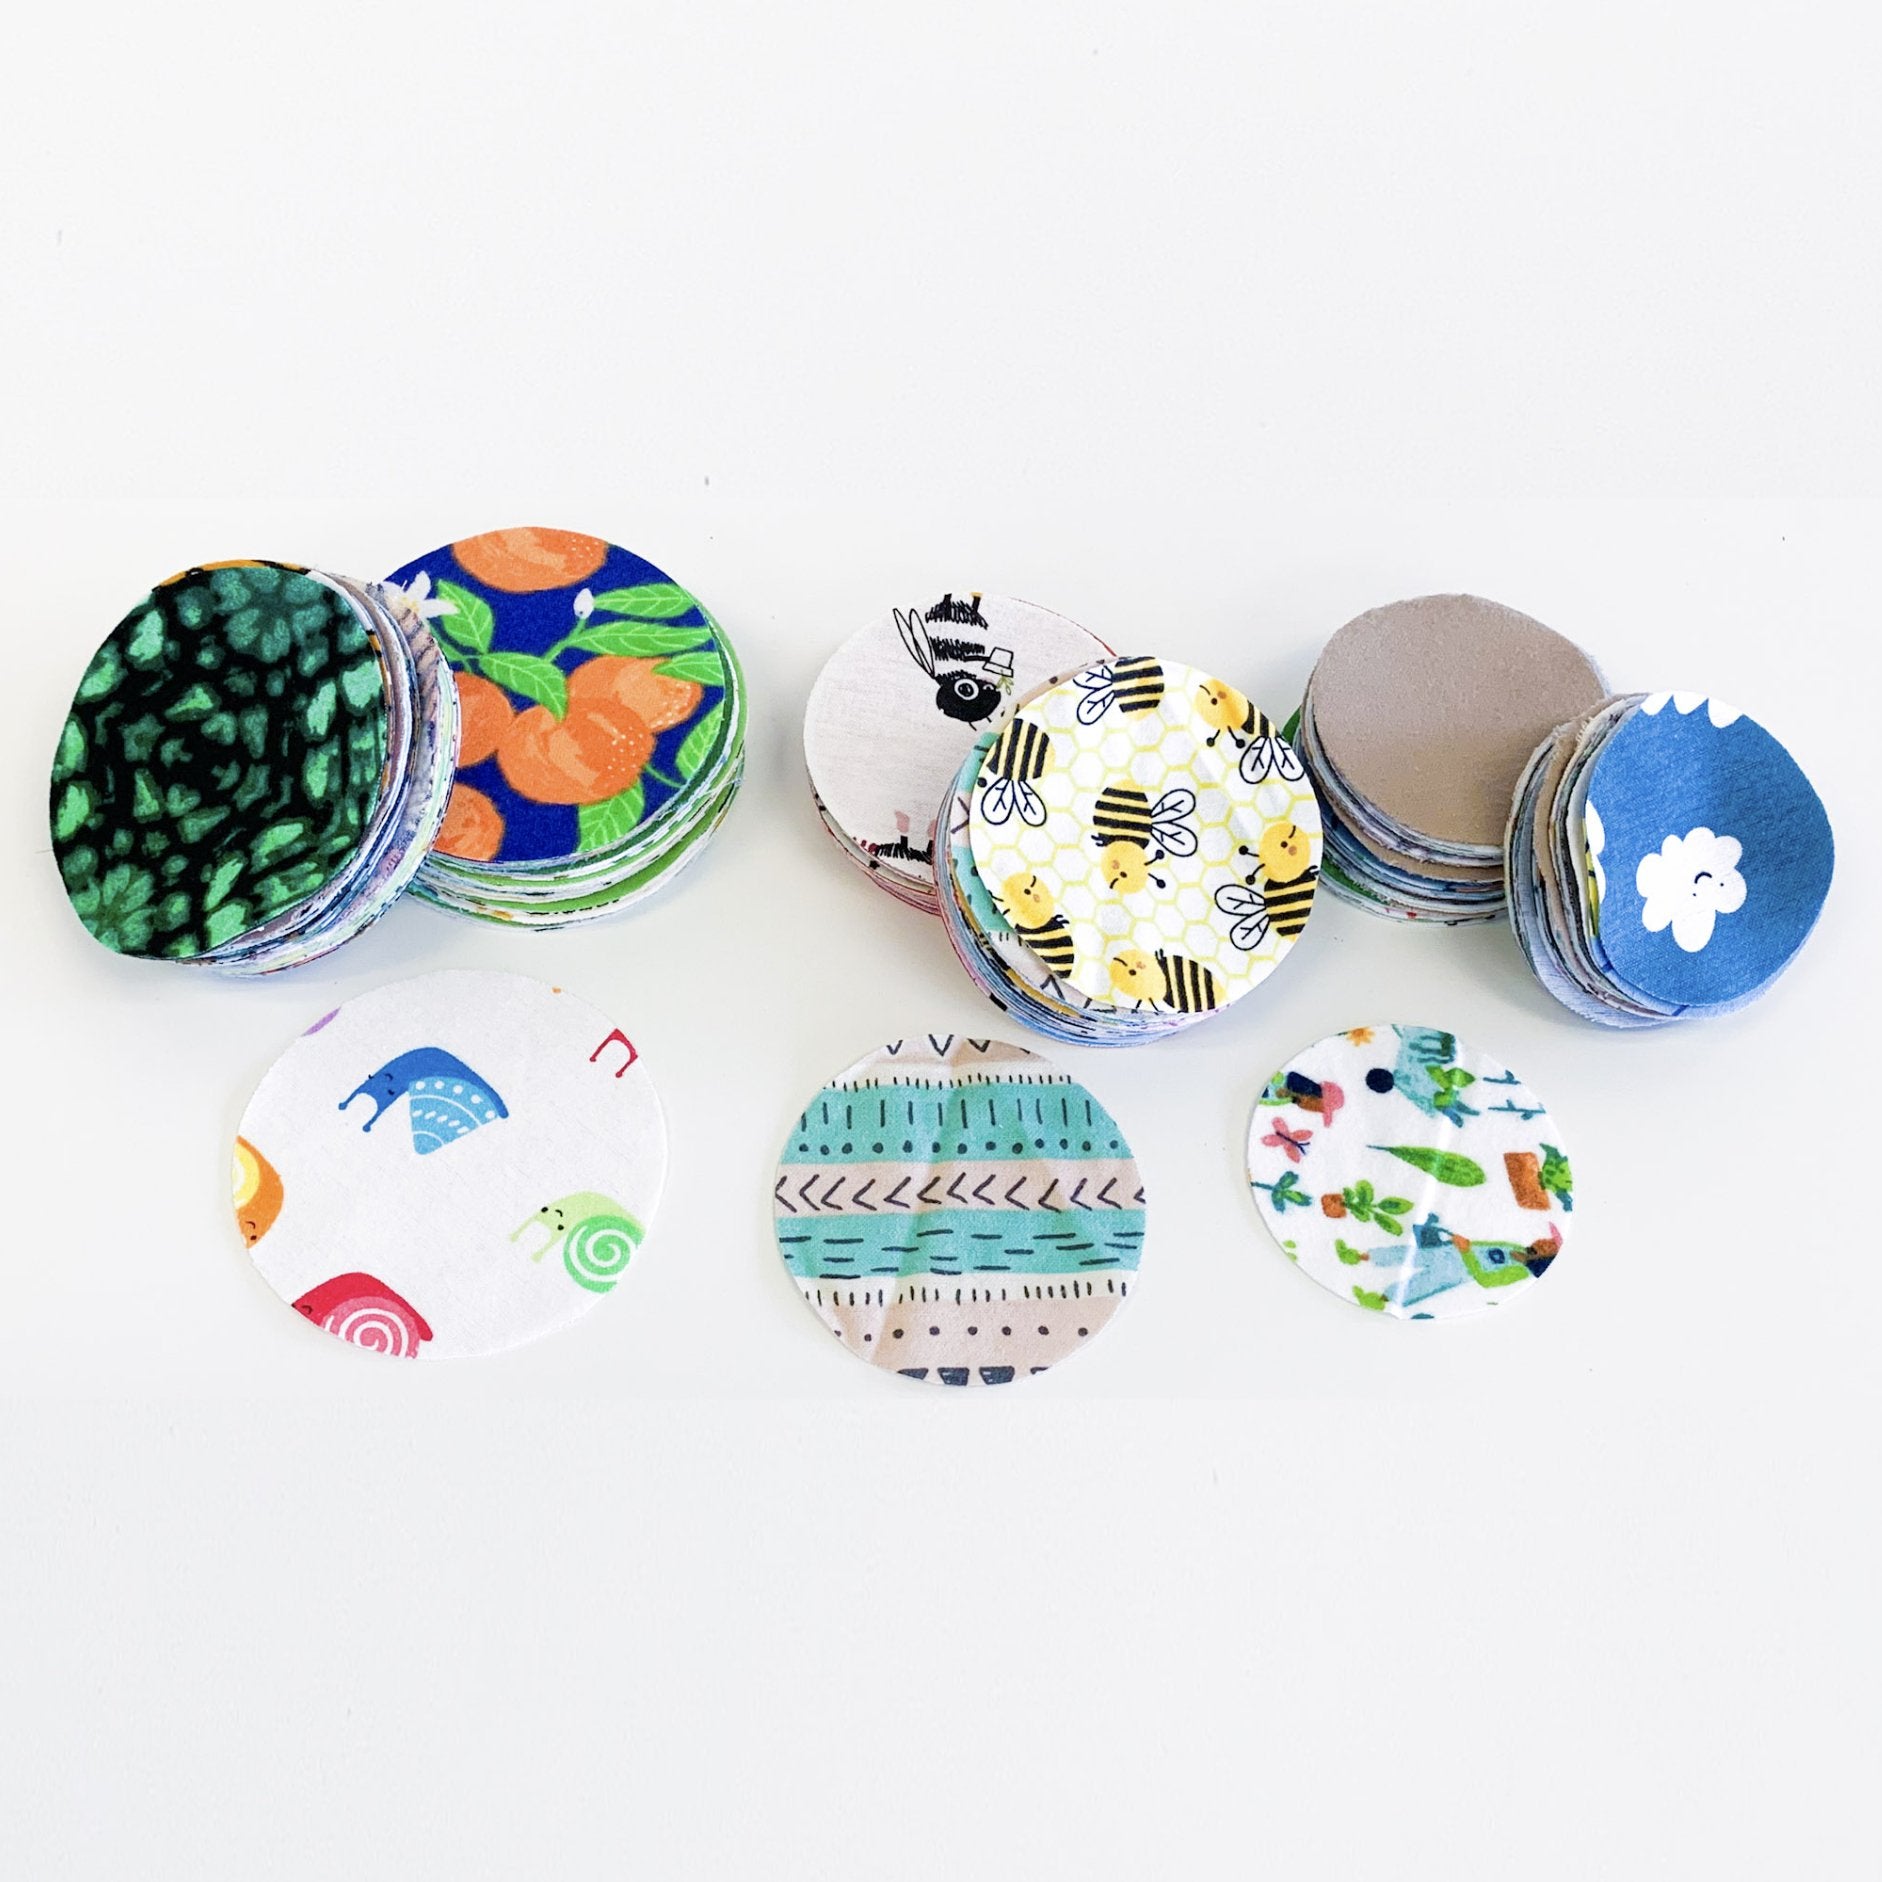 Fabric Scraps: Circles - Marley's Monsters